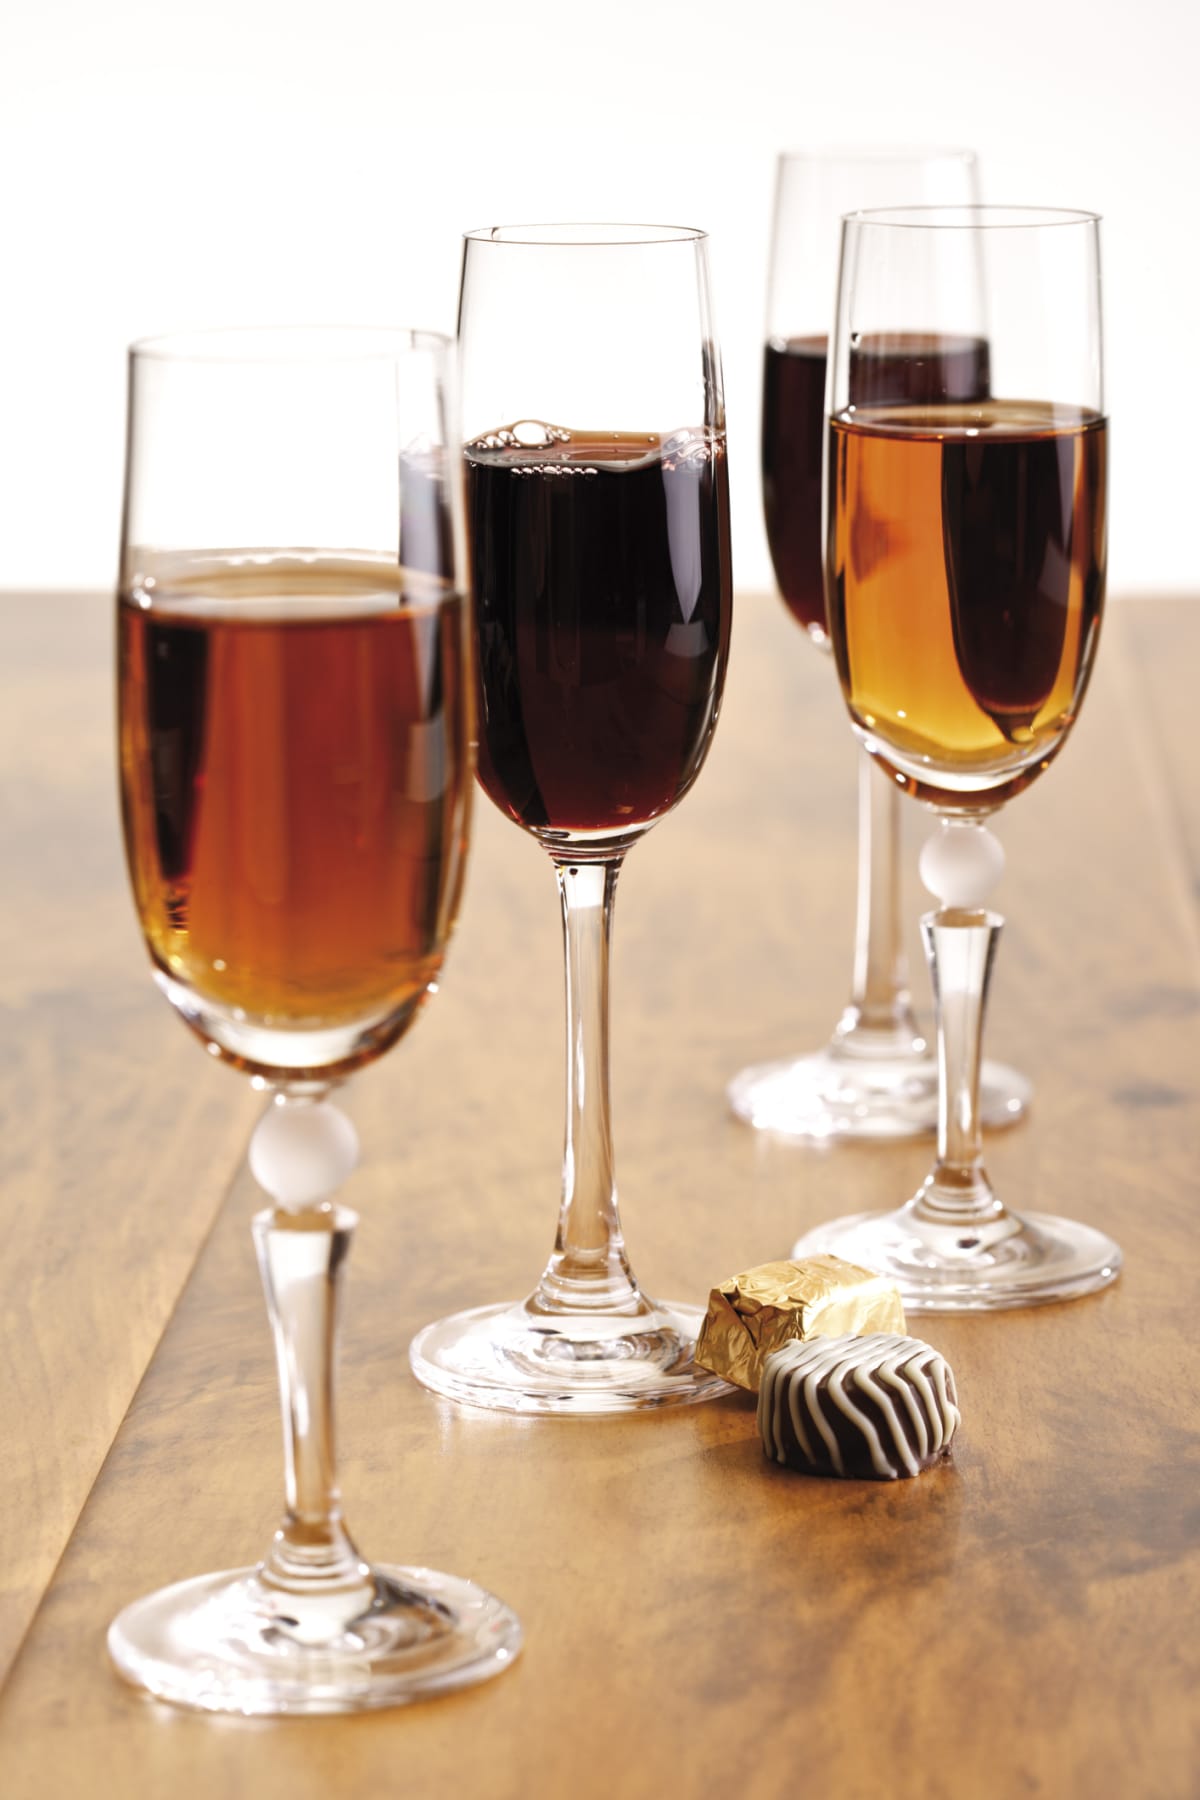 Three glasses of fortified wine on a table